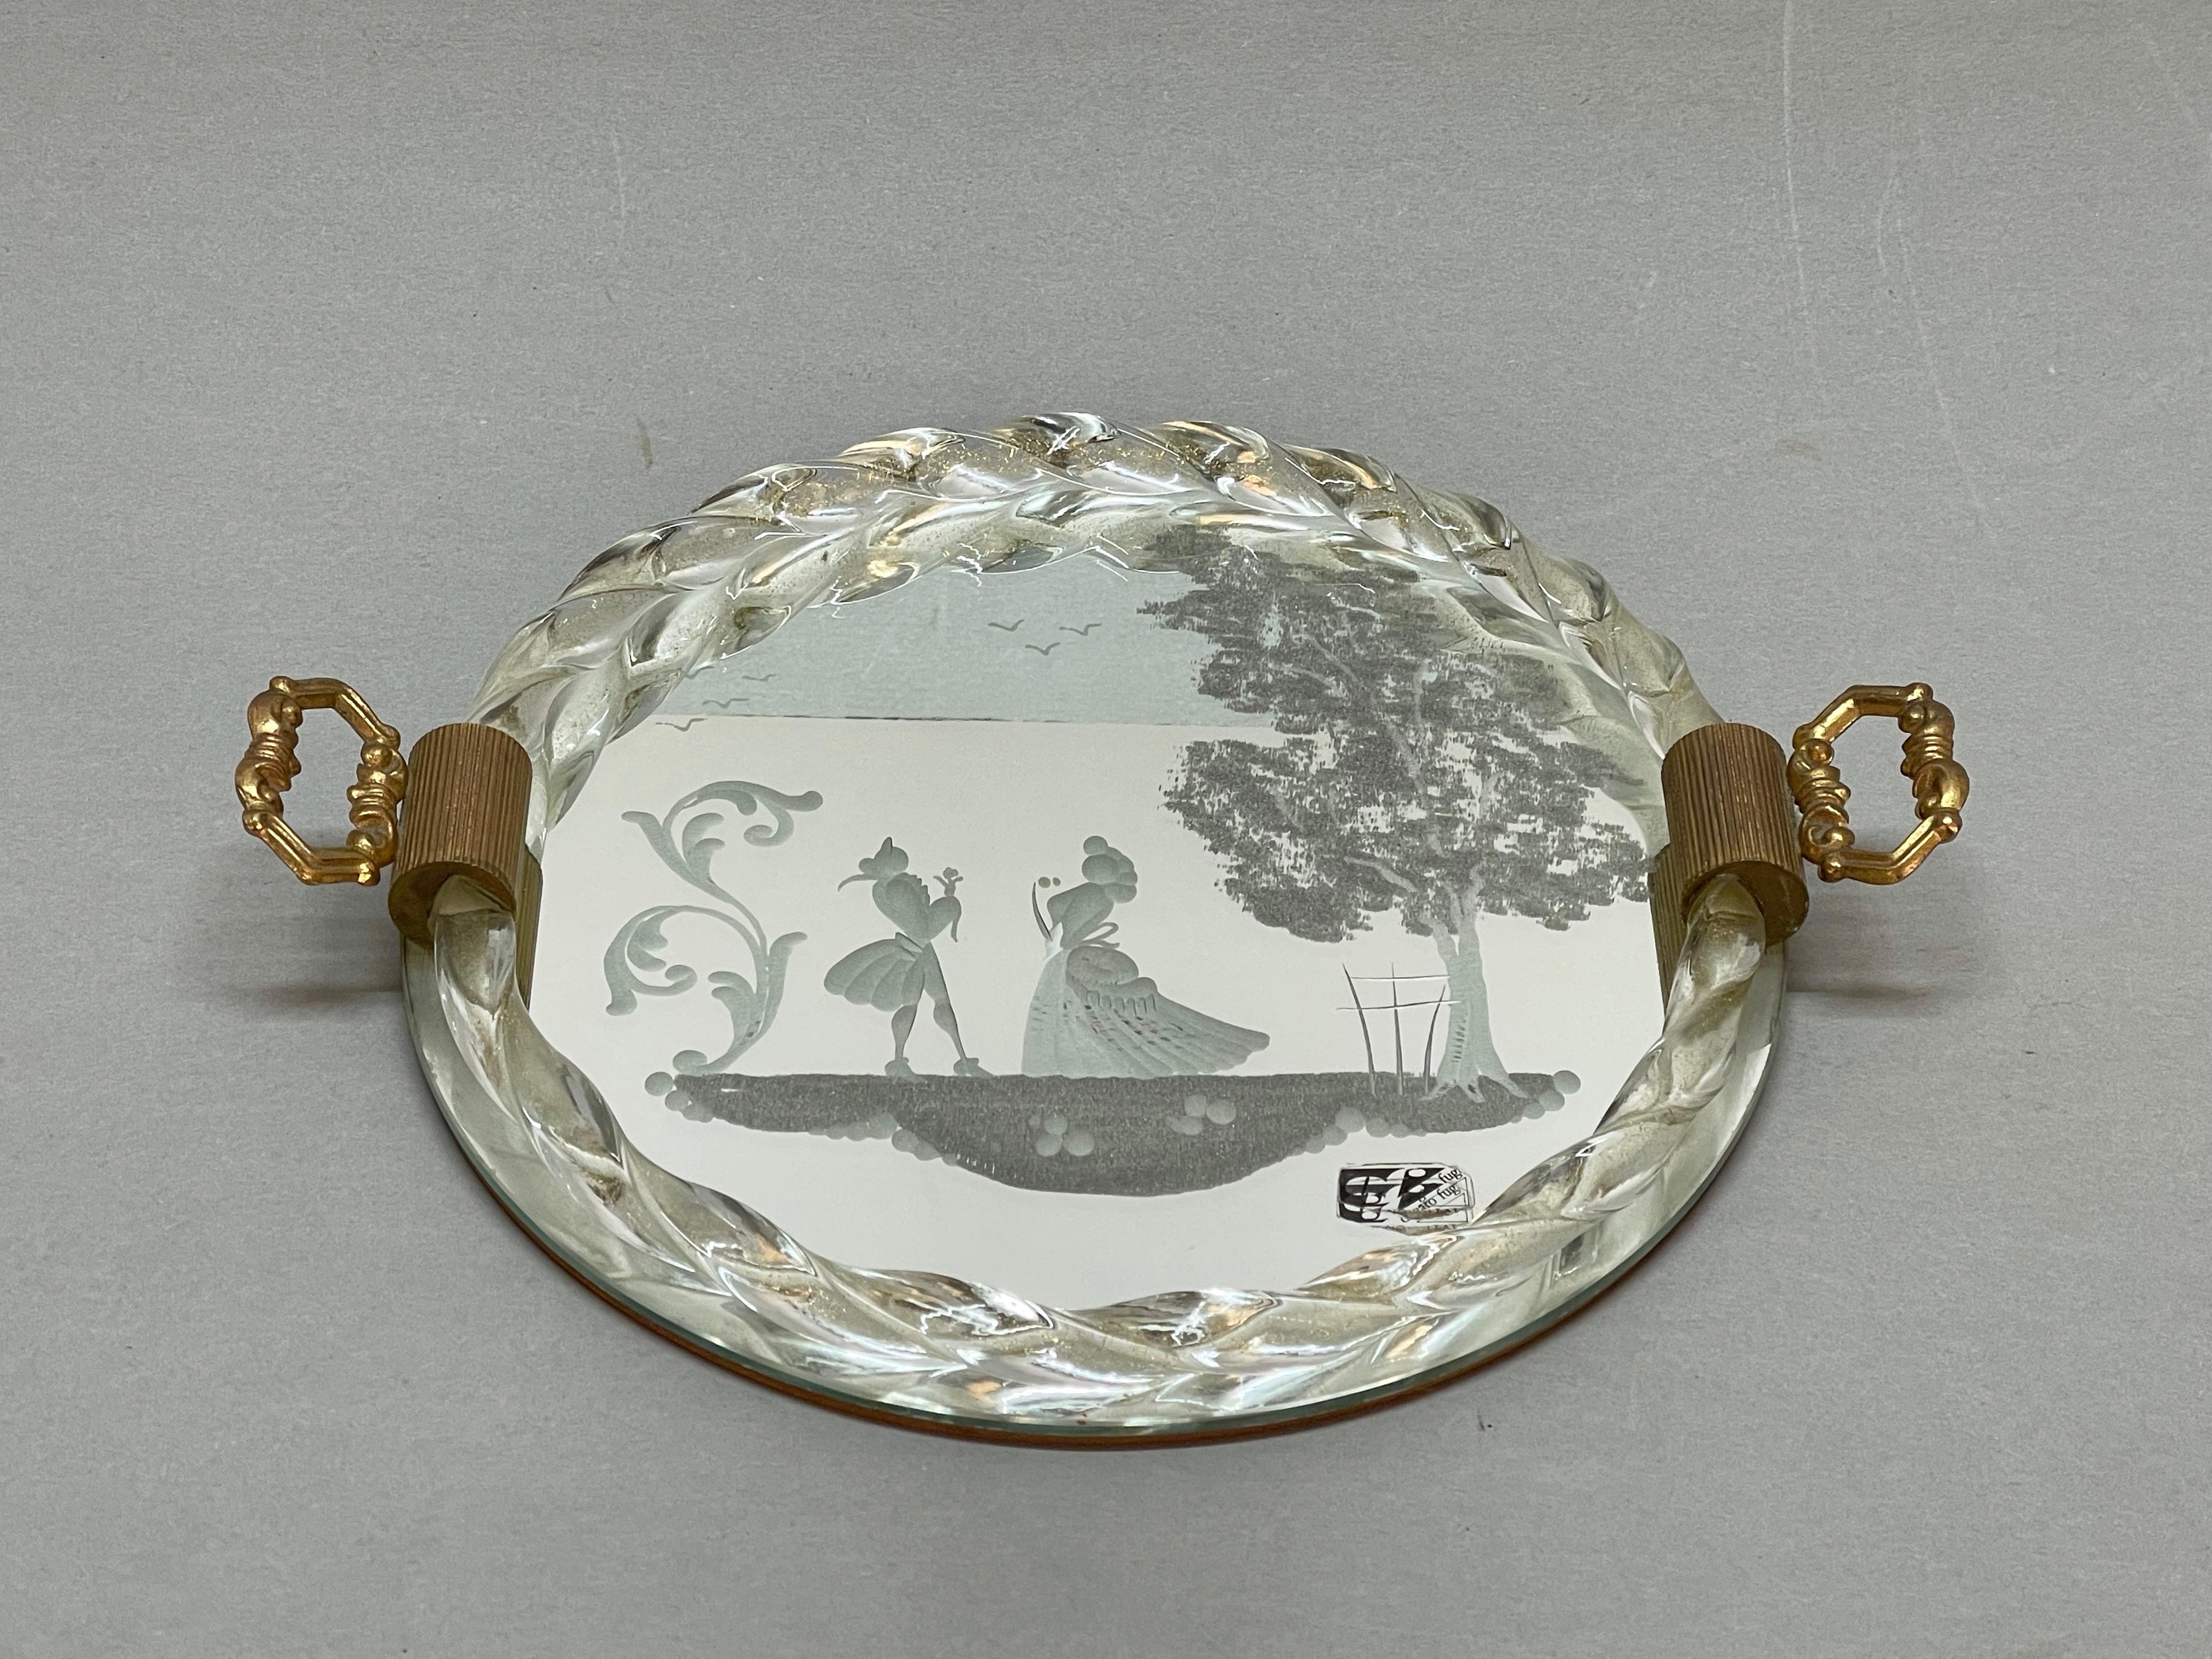 Ongaro e Fuga Gilded Engraved Mirror and Murano Glass Italian Serving Tray 1950s For Sale 3